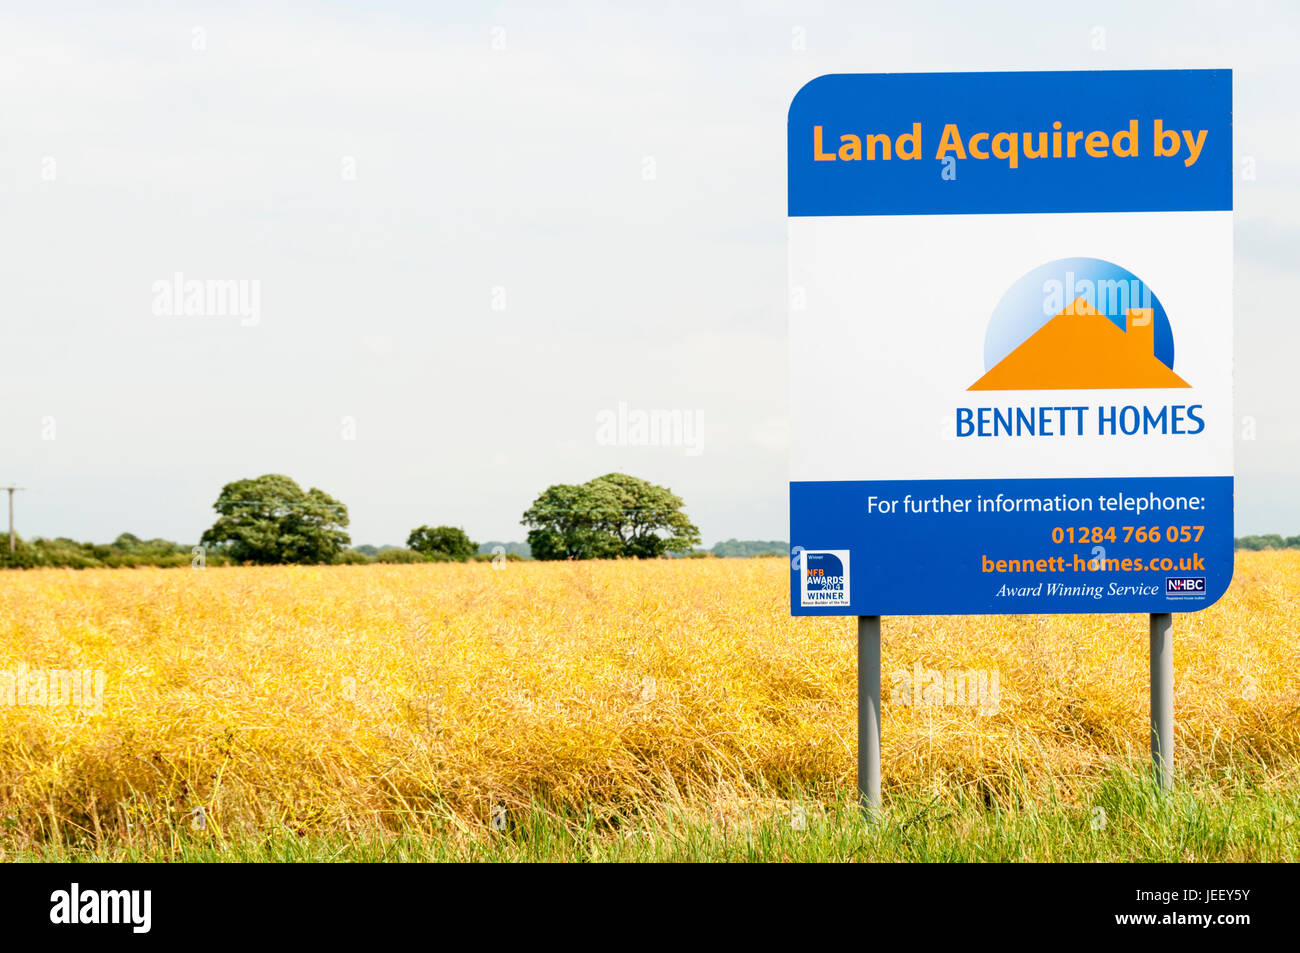 A sign advertises farmland acquired by Bennett Homes for housebuilding in West Norfolk. Stock Photo